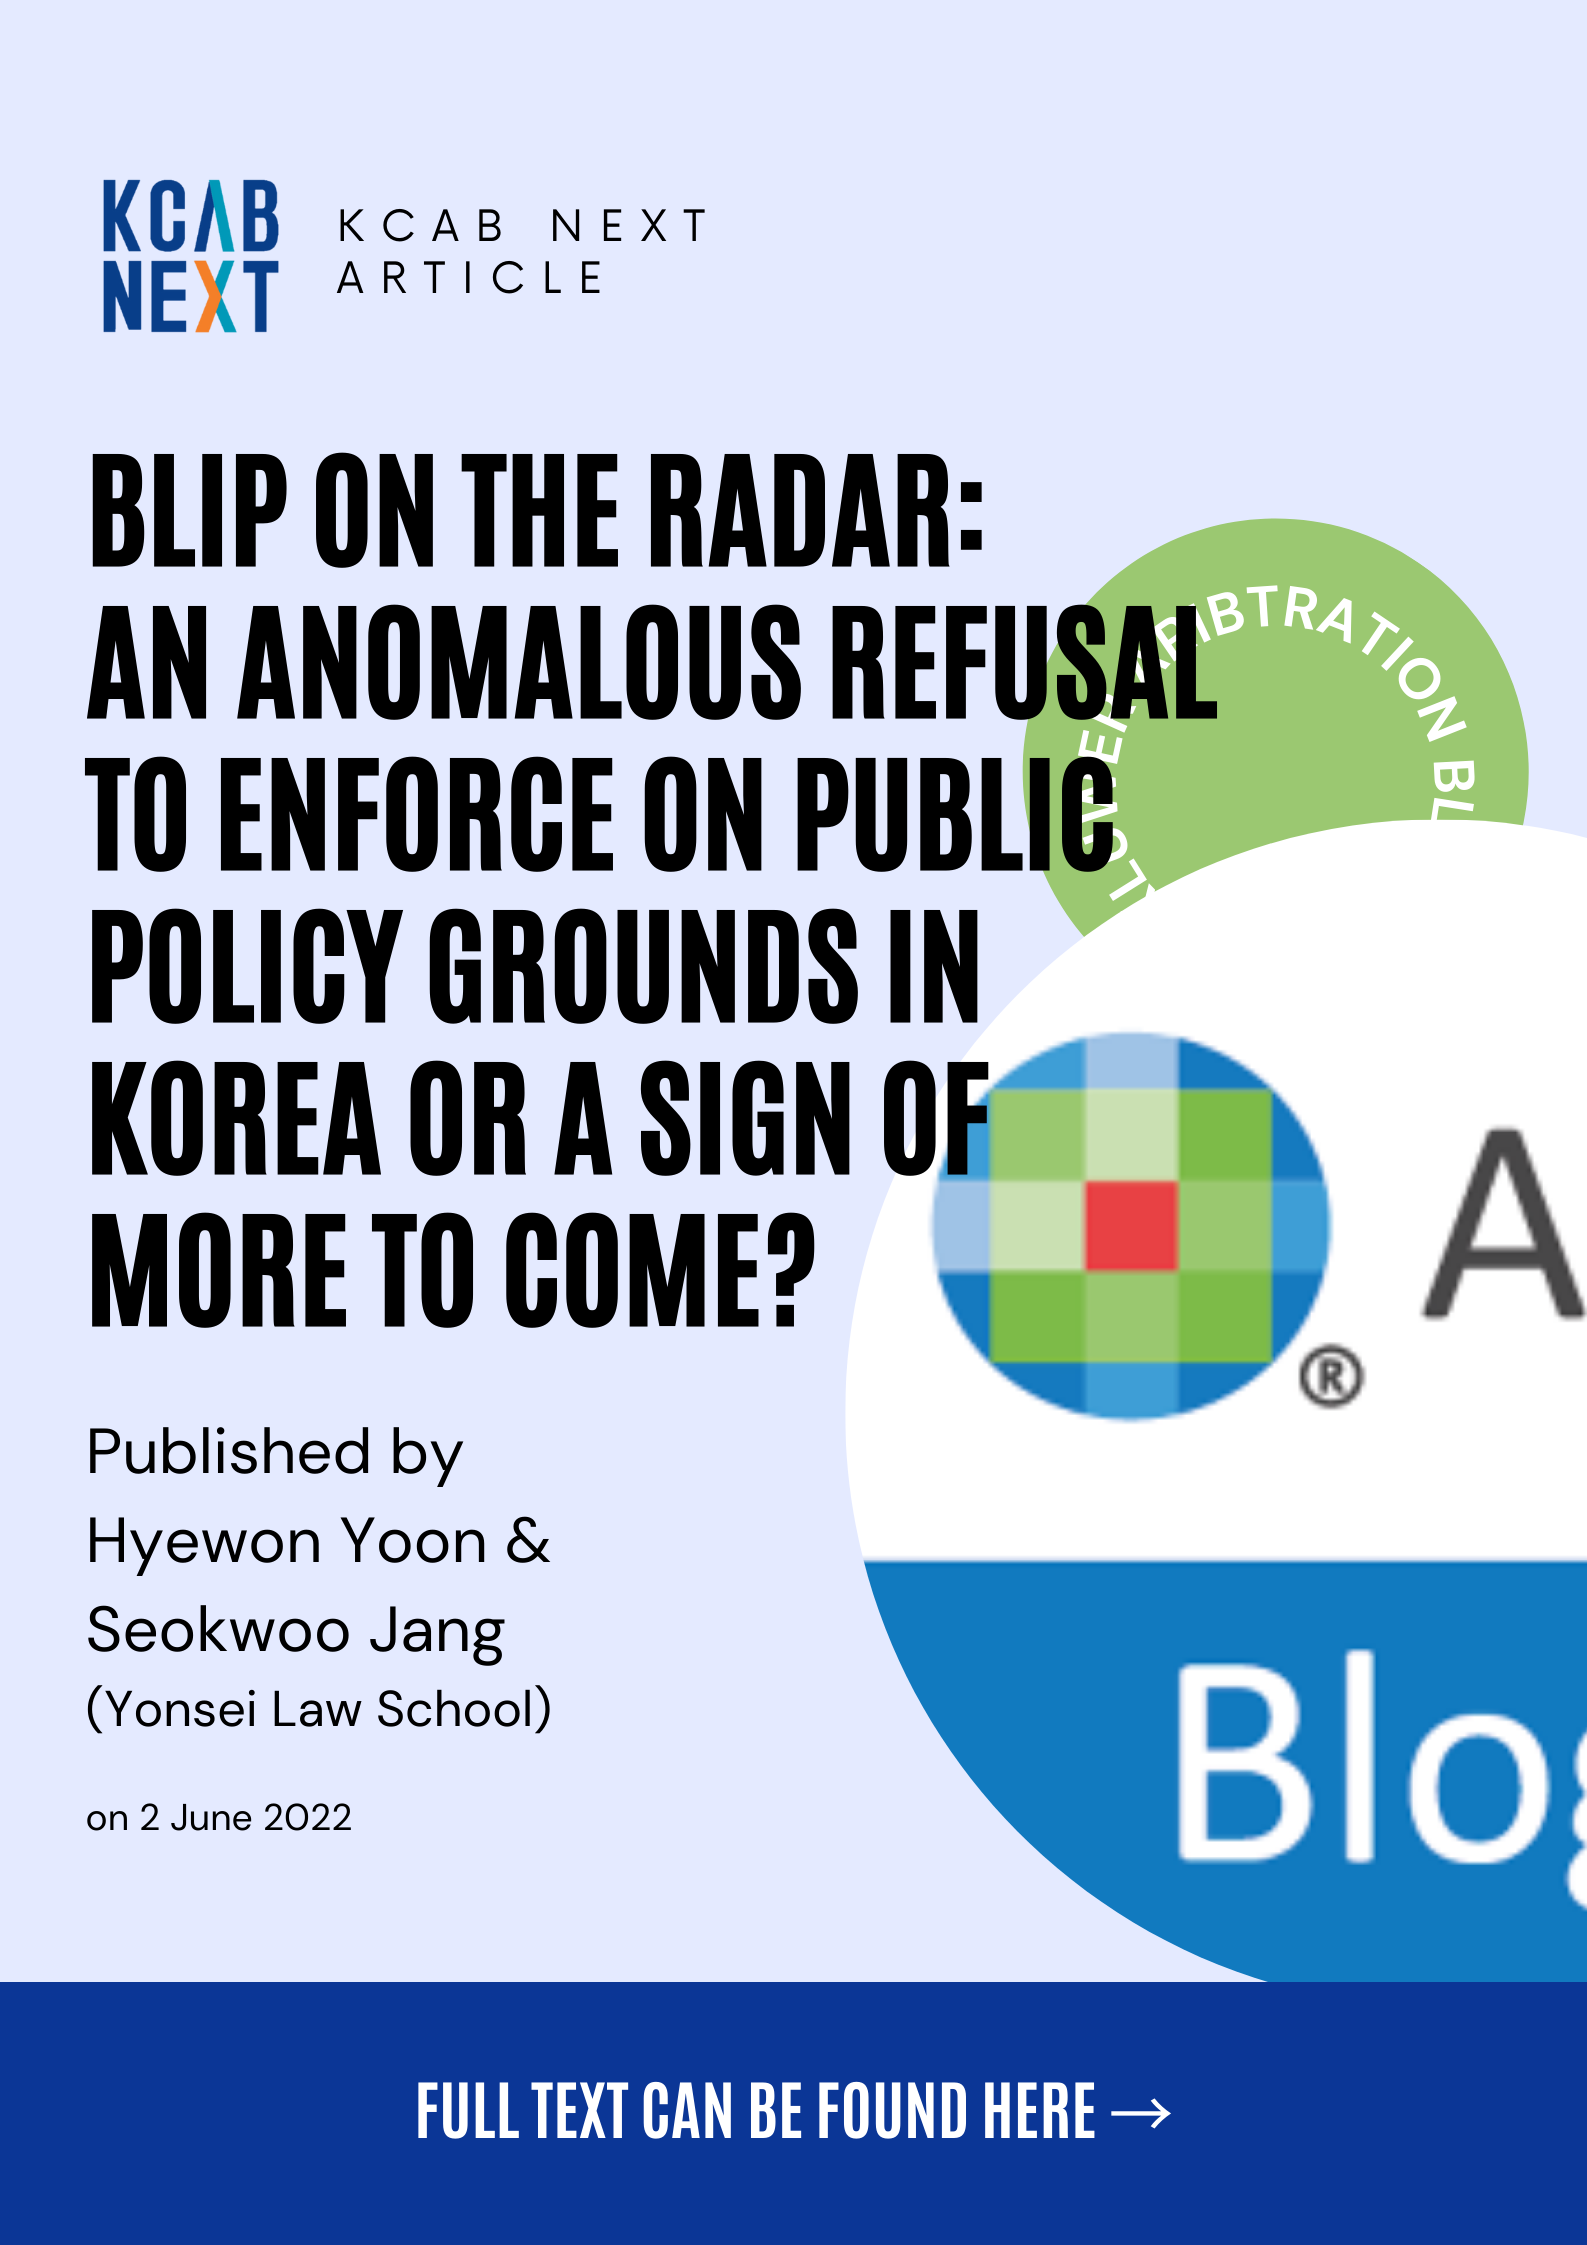 [Article] Blip on the Radar: An Anomalous Refusal to Enforce on Public Policy Grounds in Korea or a Sign of More to Come?